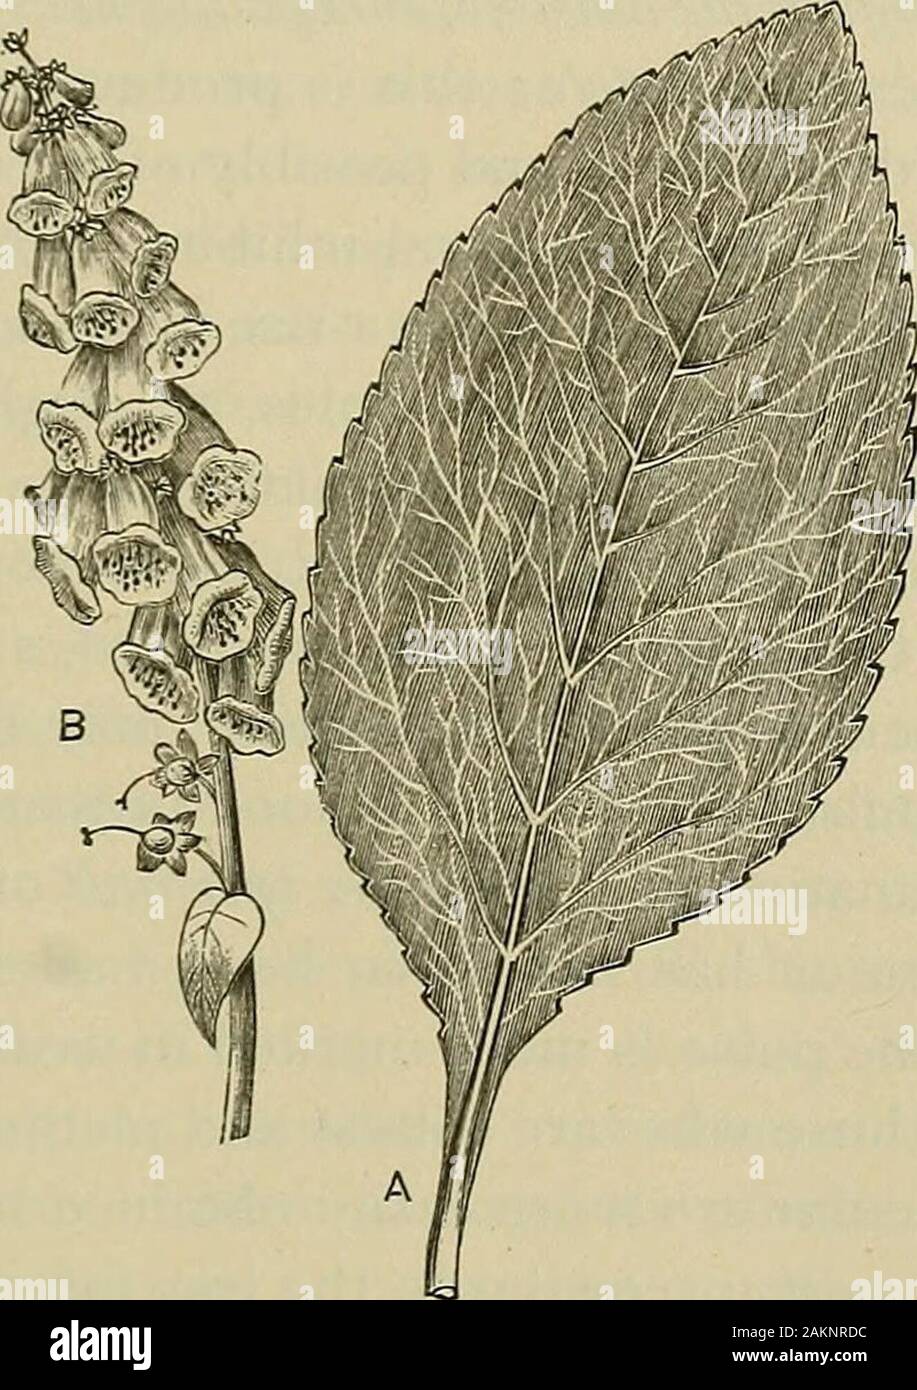 Materia medica and therapeutics : for physicians and students . rminal spike. The seeds and leaves are both active,but the latter only are em.Y&gt;oyed, from plants of the second yearsgrowth; and those from the European wild plants are preferred,as the cultivated variety is thought to be inferior in virtue. The * Gossypium Herbaceum. Thesis by Thos. Harry Huzza, m.d., avvarded theMedical News Prize at the Jefferson Medical College, of Philadelphia, 1887. SPINANTS DIGITALIS. 26q petioles are removed, and the leaves are then dried in baskets, ina dark place, in a drying-stove. When dried, they Stock Photo